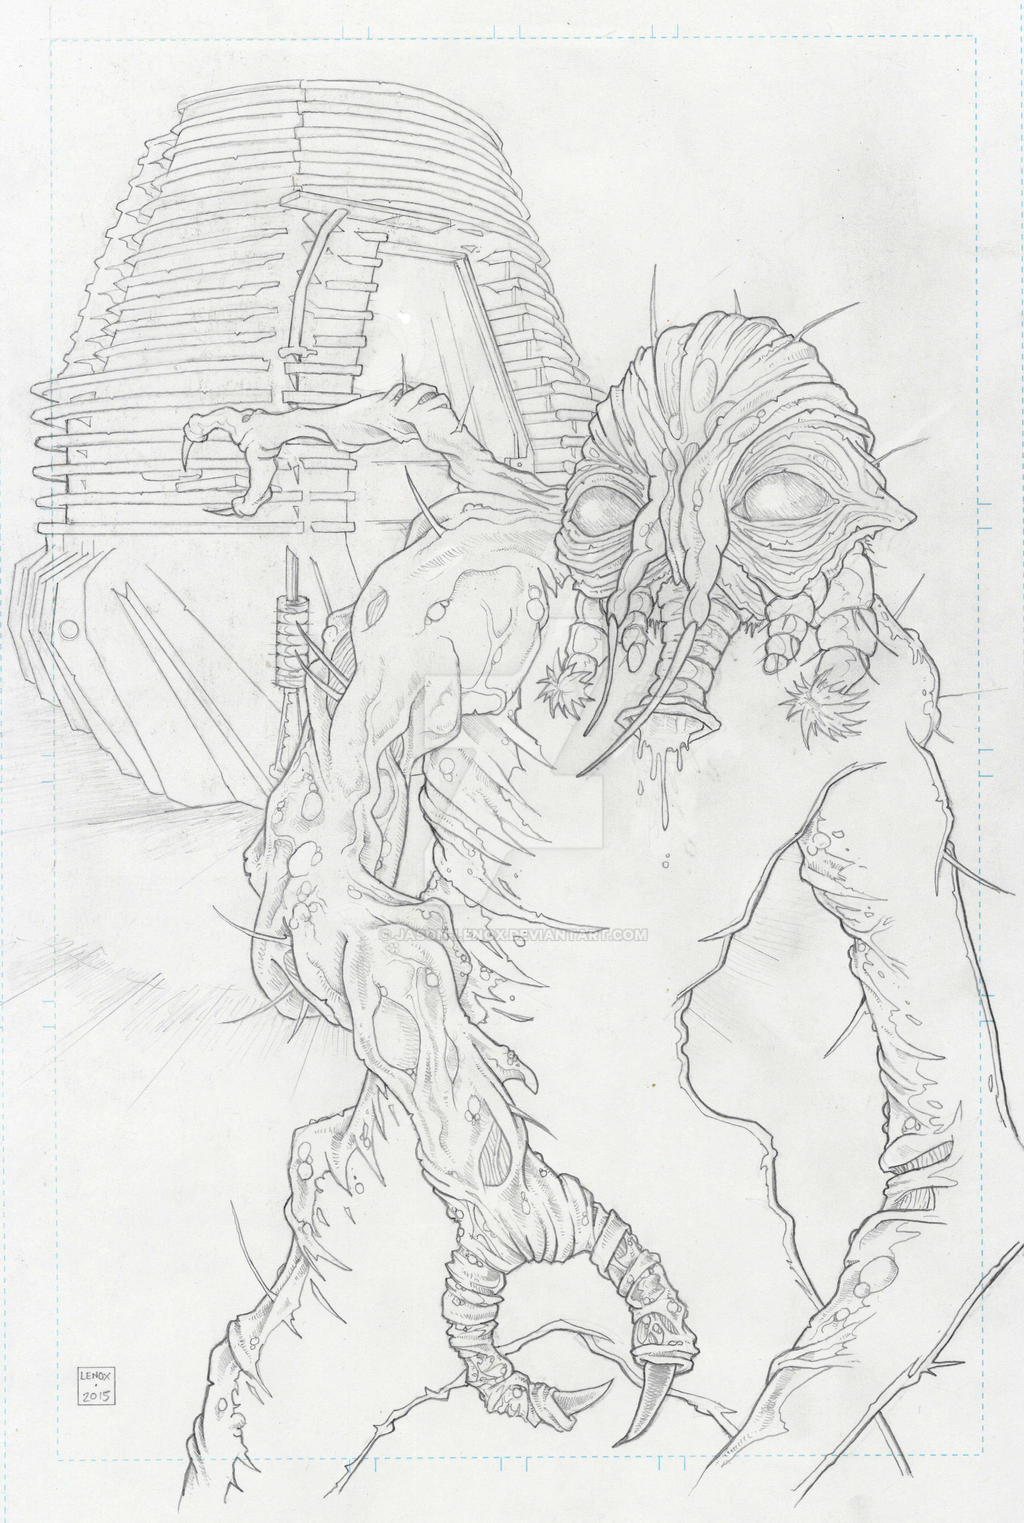 THE FLY - Brundlefly Pencils